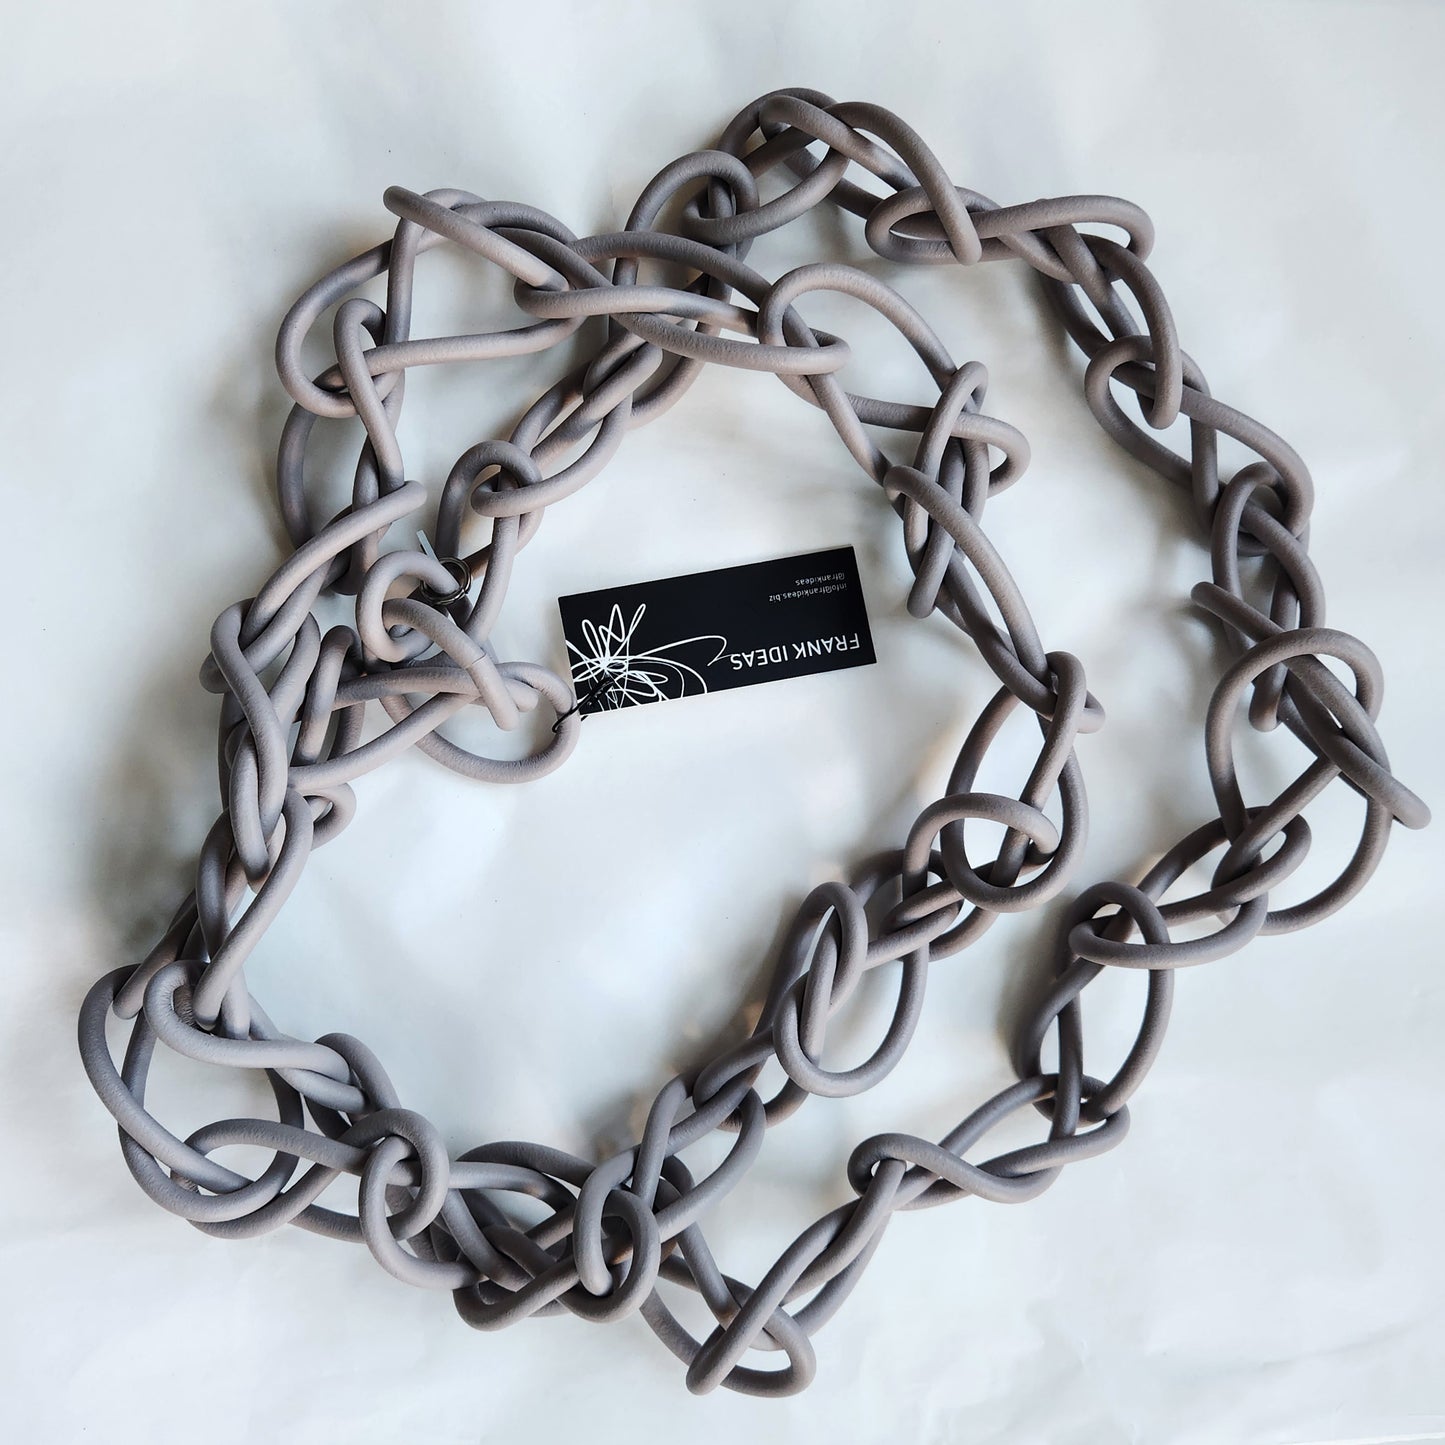 Chaotic necklace in warm grey